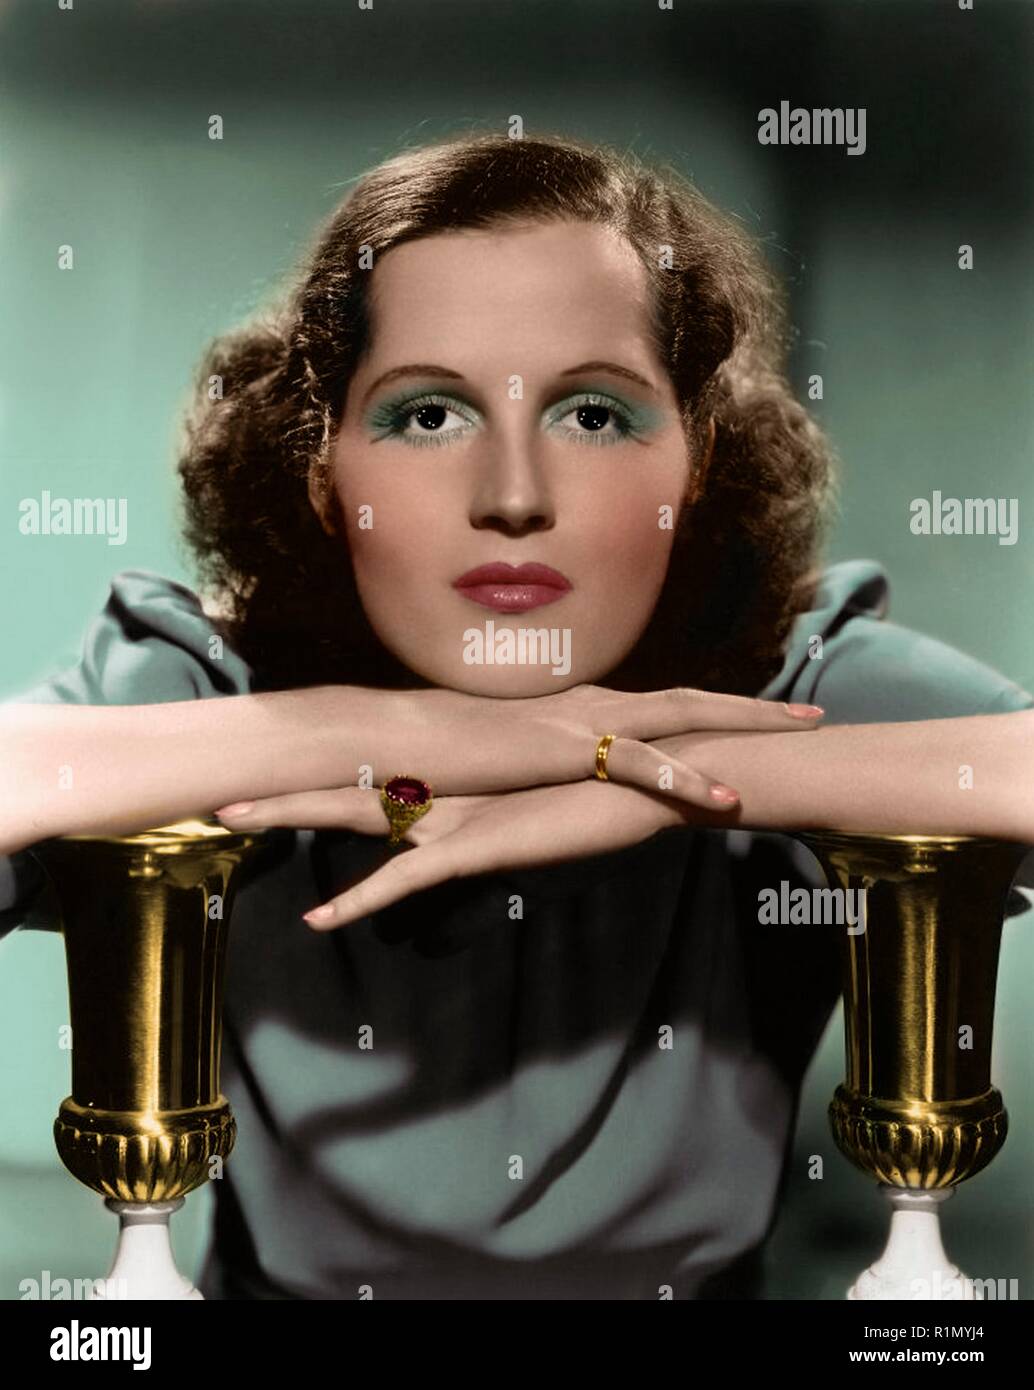 Edith Atwater (April 22, 1911 – March 14, 1986) was an American stage, film and television actress.  Born in Chicago, Atwater made her Broadway debut in 1933. In 1939 she starred in The Man Who Came to Dinner. Her film career included roles in The Body Snatcher (1945), Sweet Smell of Success (1957), It Happened at the World's Fair (1963), Strait-Jacket (1964), Strange Bedfellows (1965), True Grit (1969), The Love Machine (1971), Die Sister, Die! (1972), Mackintosh and T.J. (1975) and Family Plot (1976). Hollywood Photo Archive / MediaPunch Stock Photo